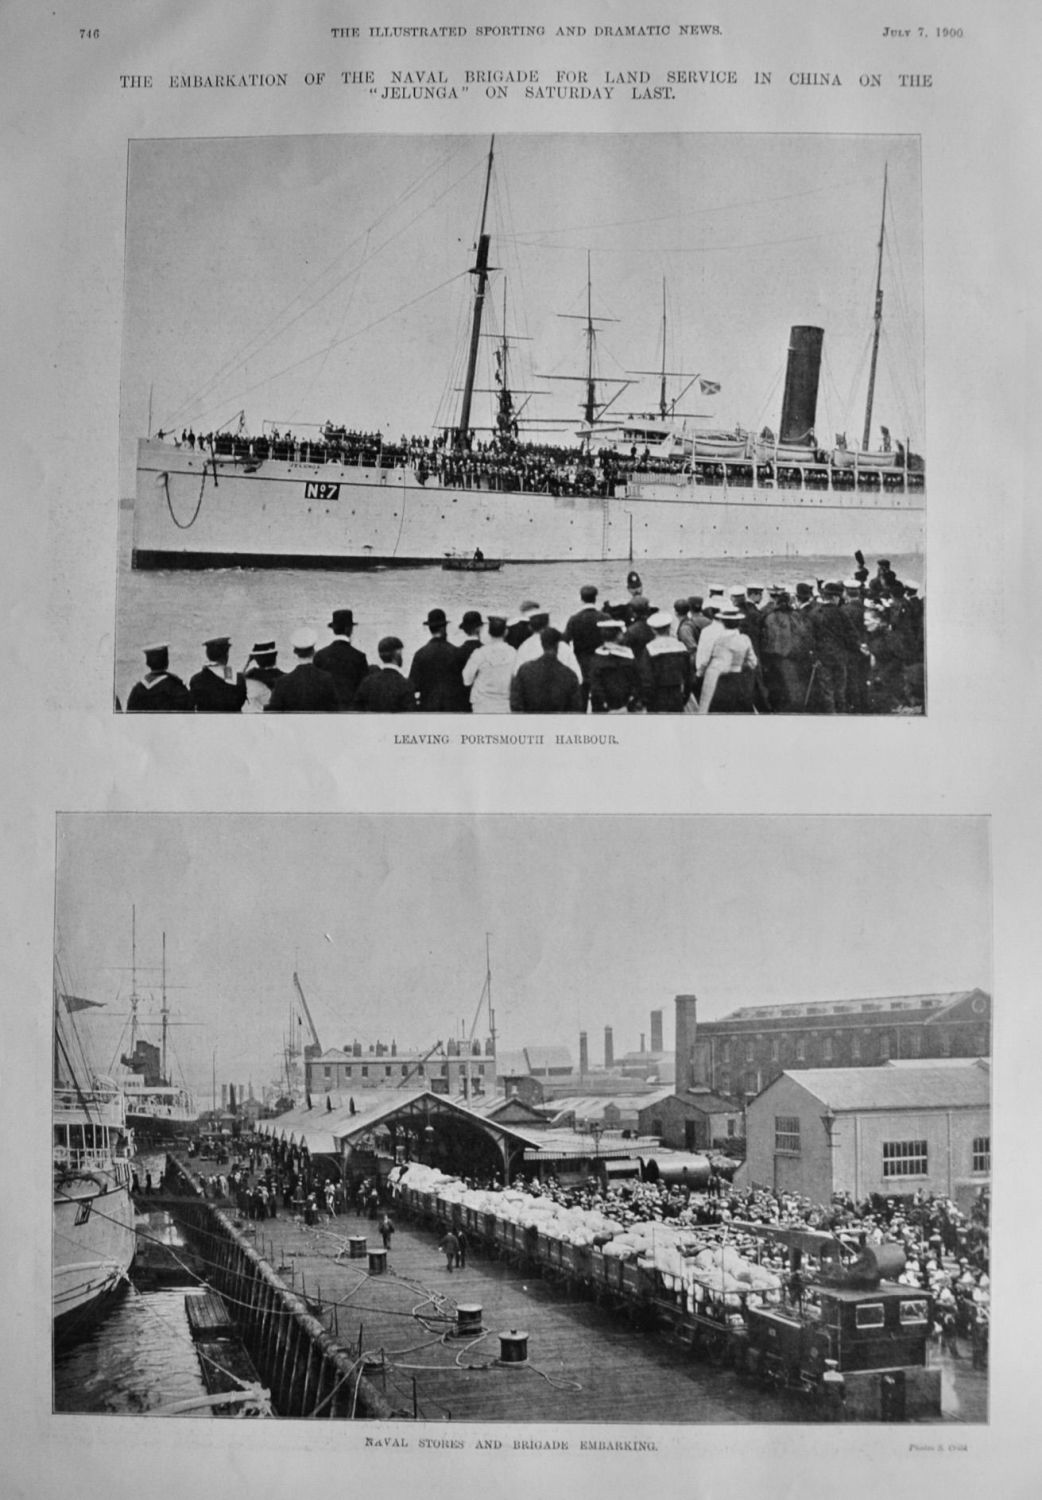 The Embarkation of the Naval Brigade for Land Service in China on the 